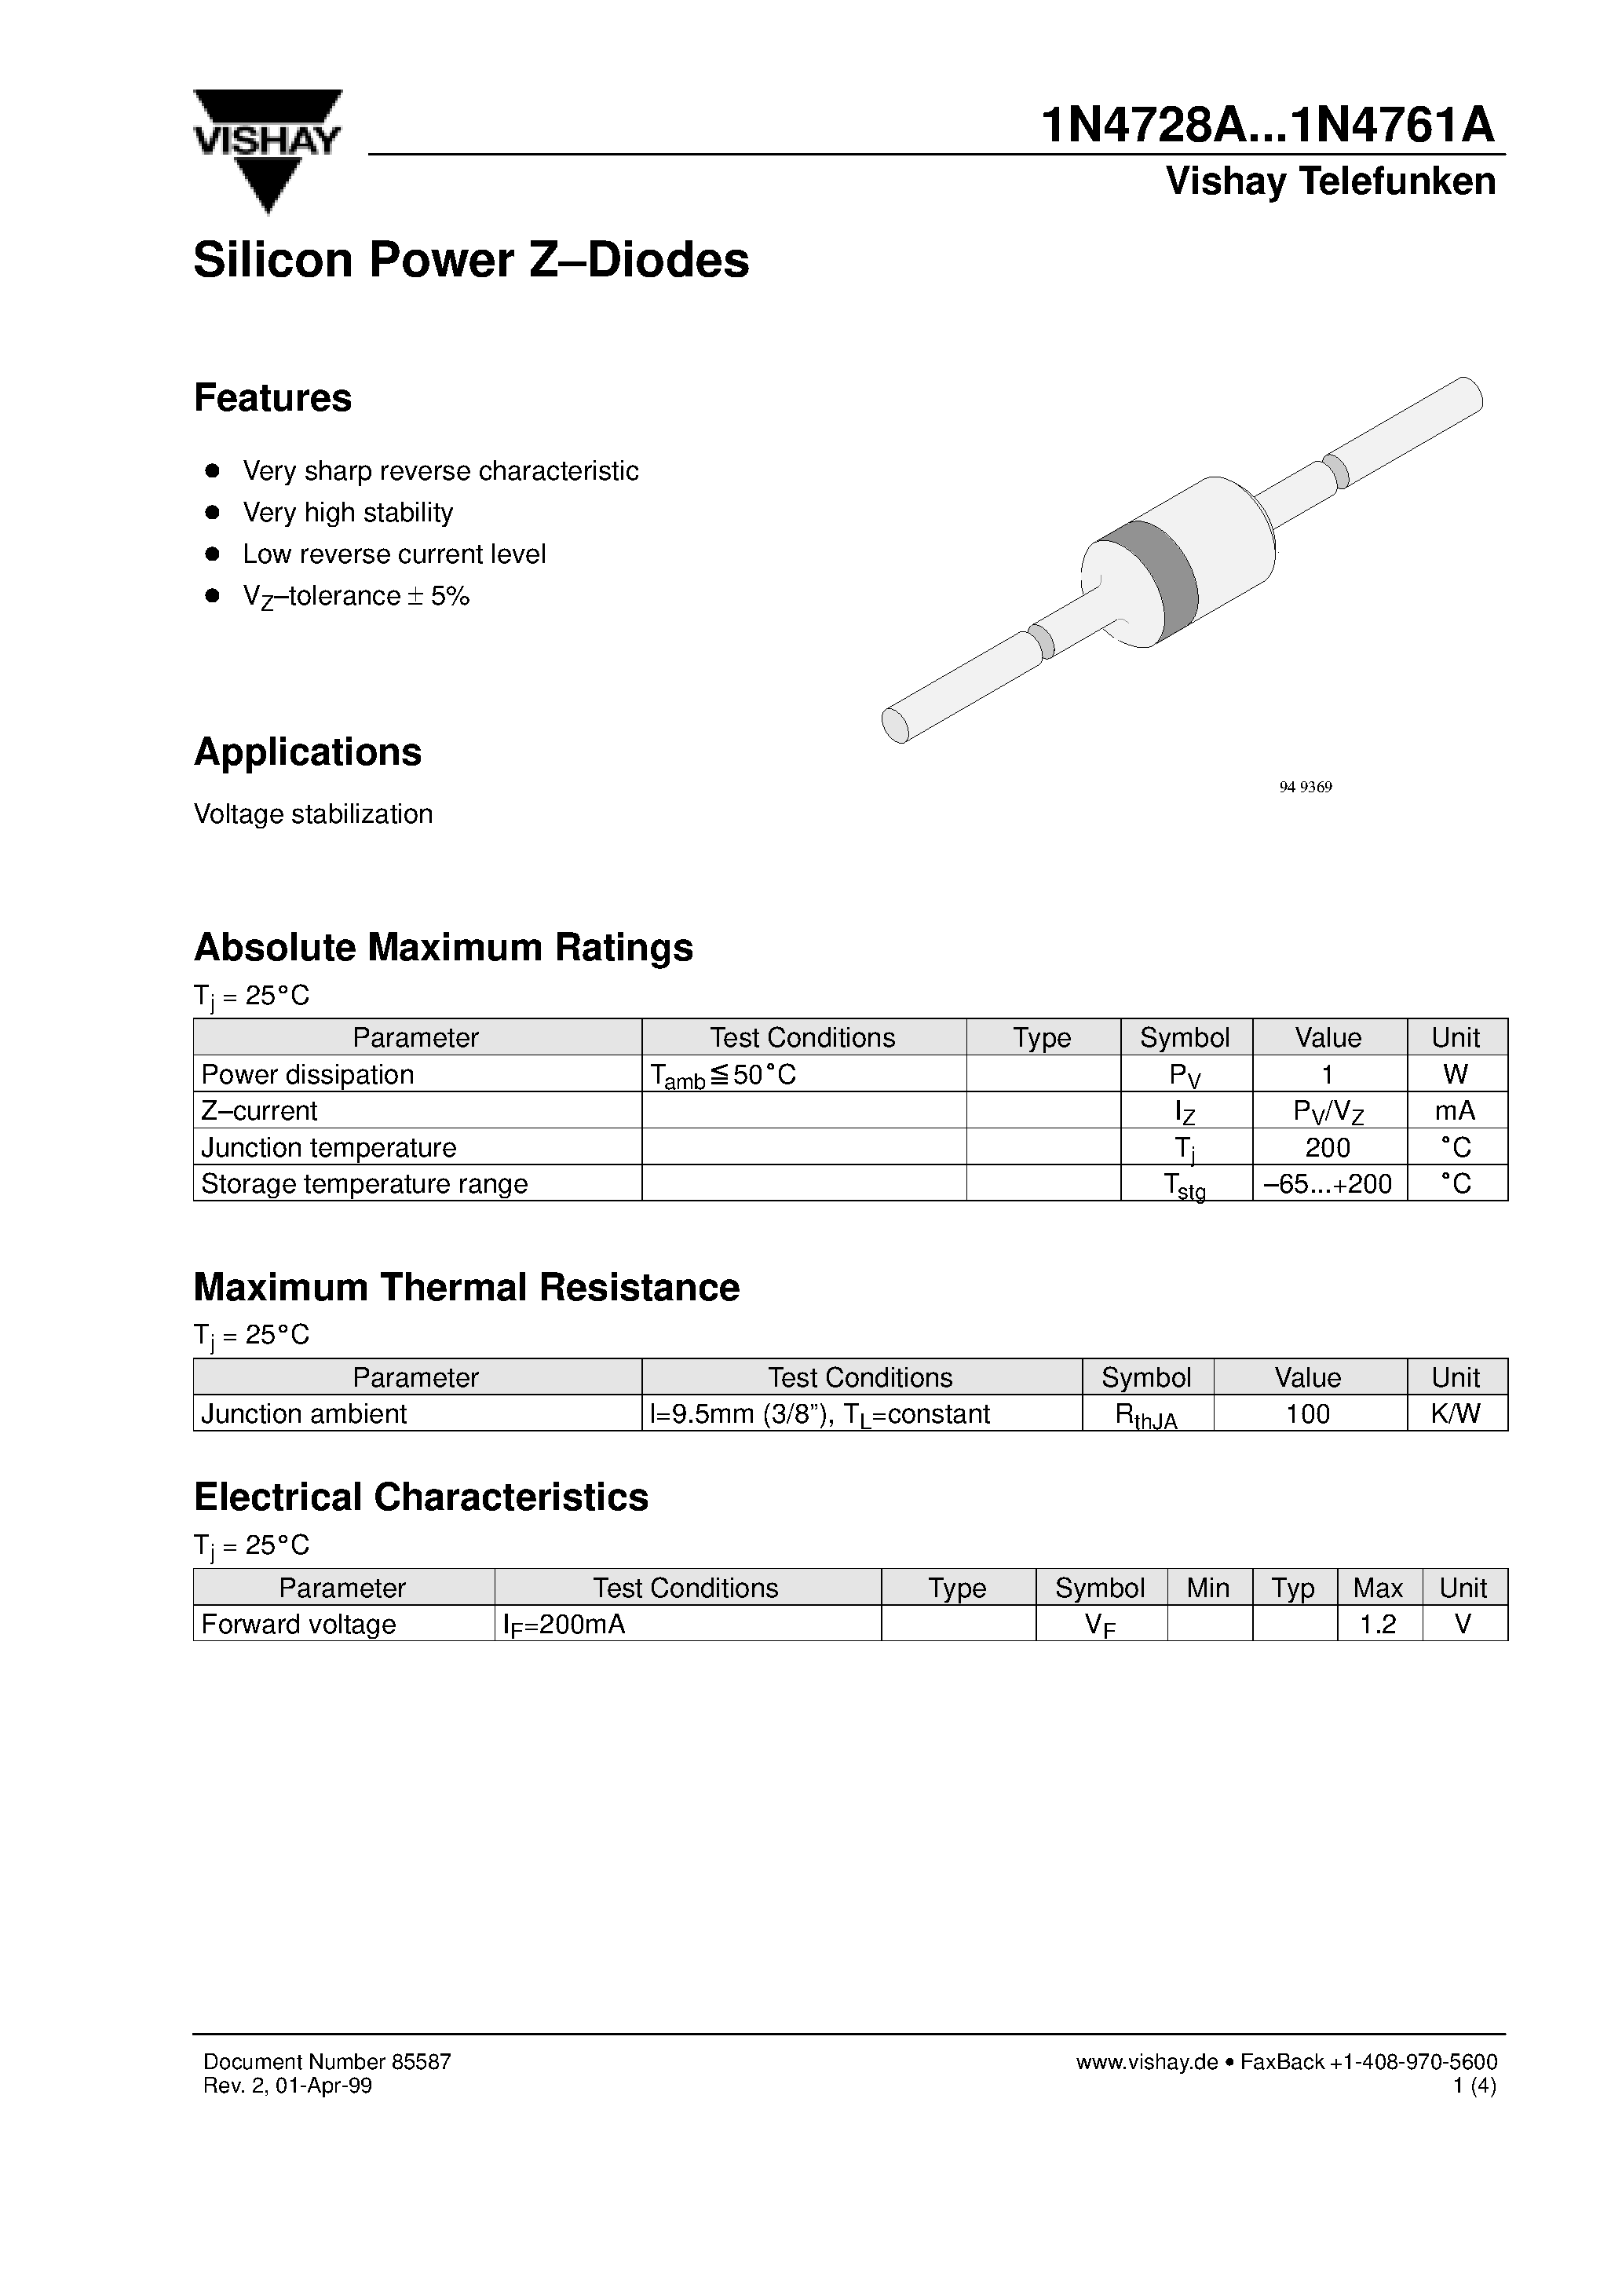 Даташит 1N4758A - Silicon Power Z-Diodes страница 1